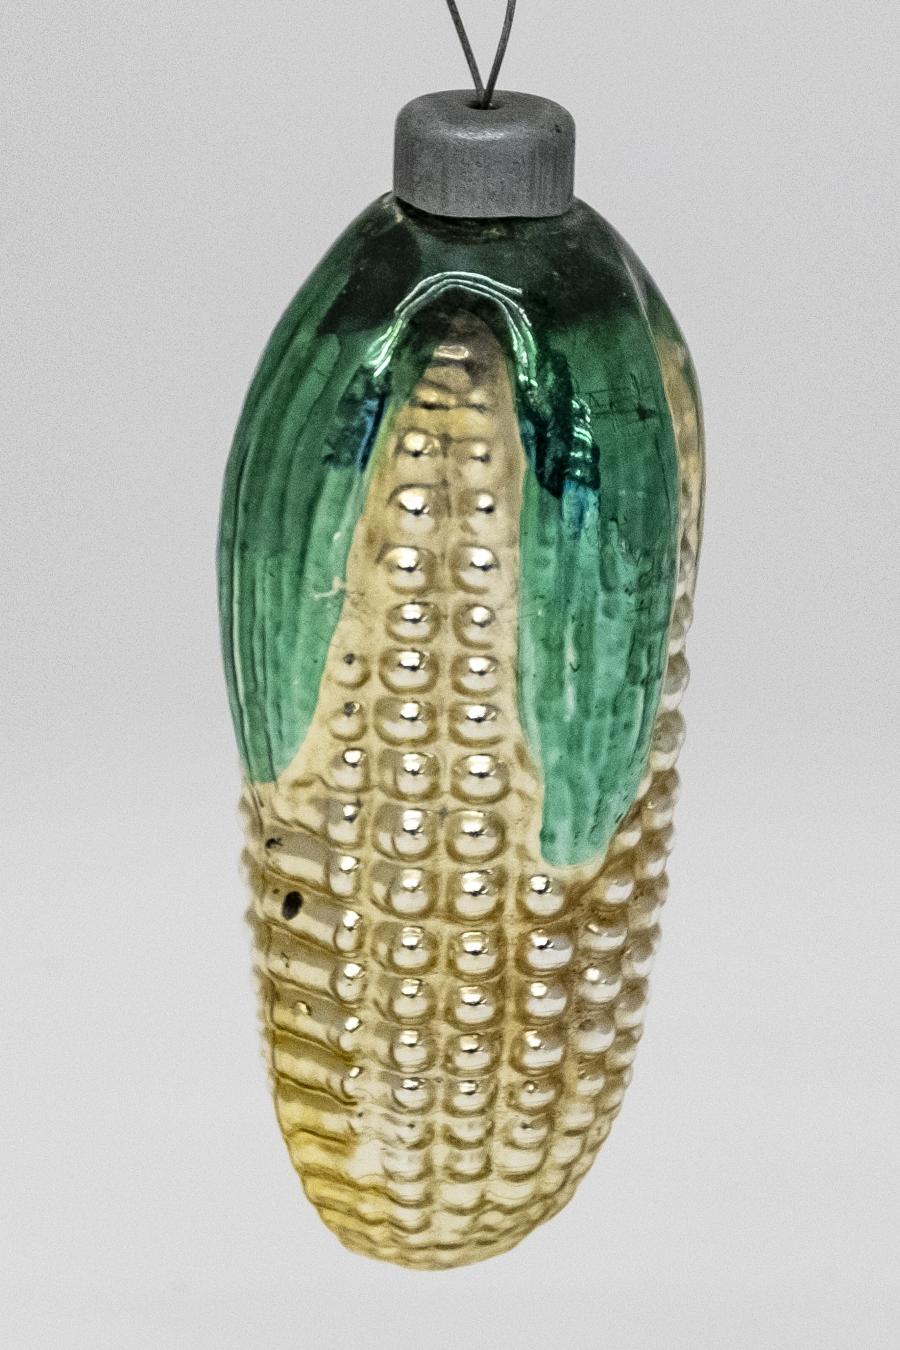 A golden tin corn-shaped ornament with green-painted leaves. 